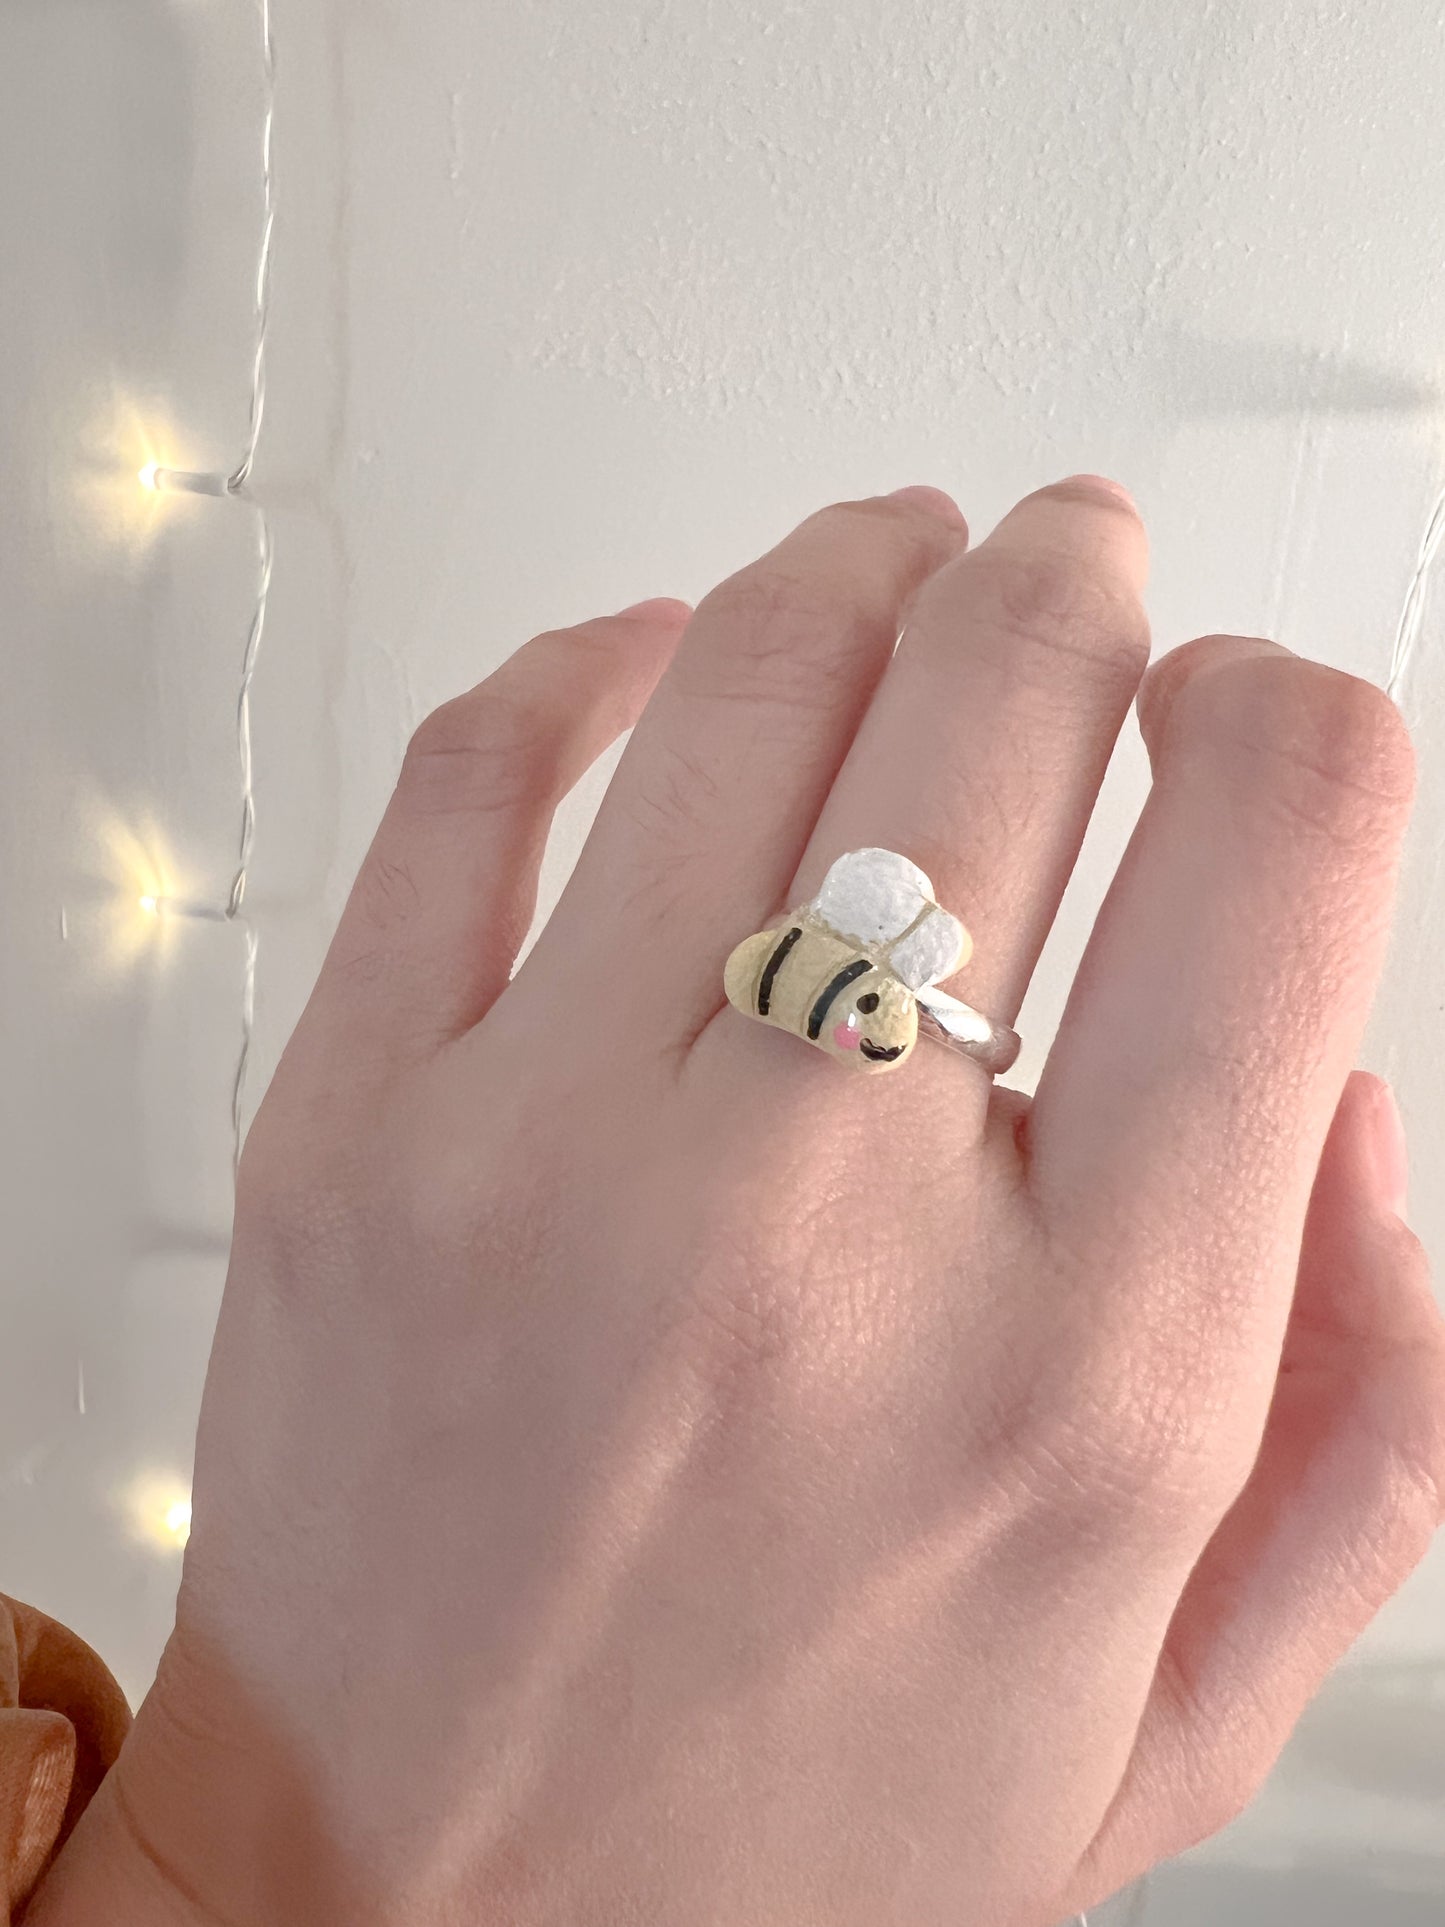 The Bee ring